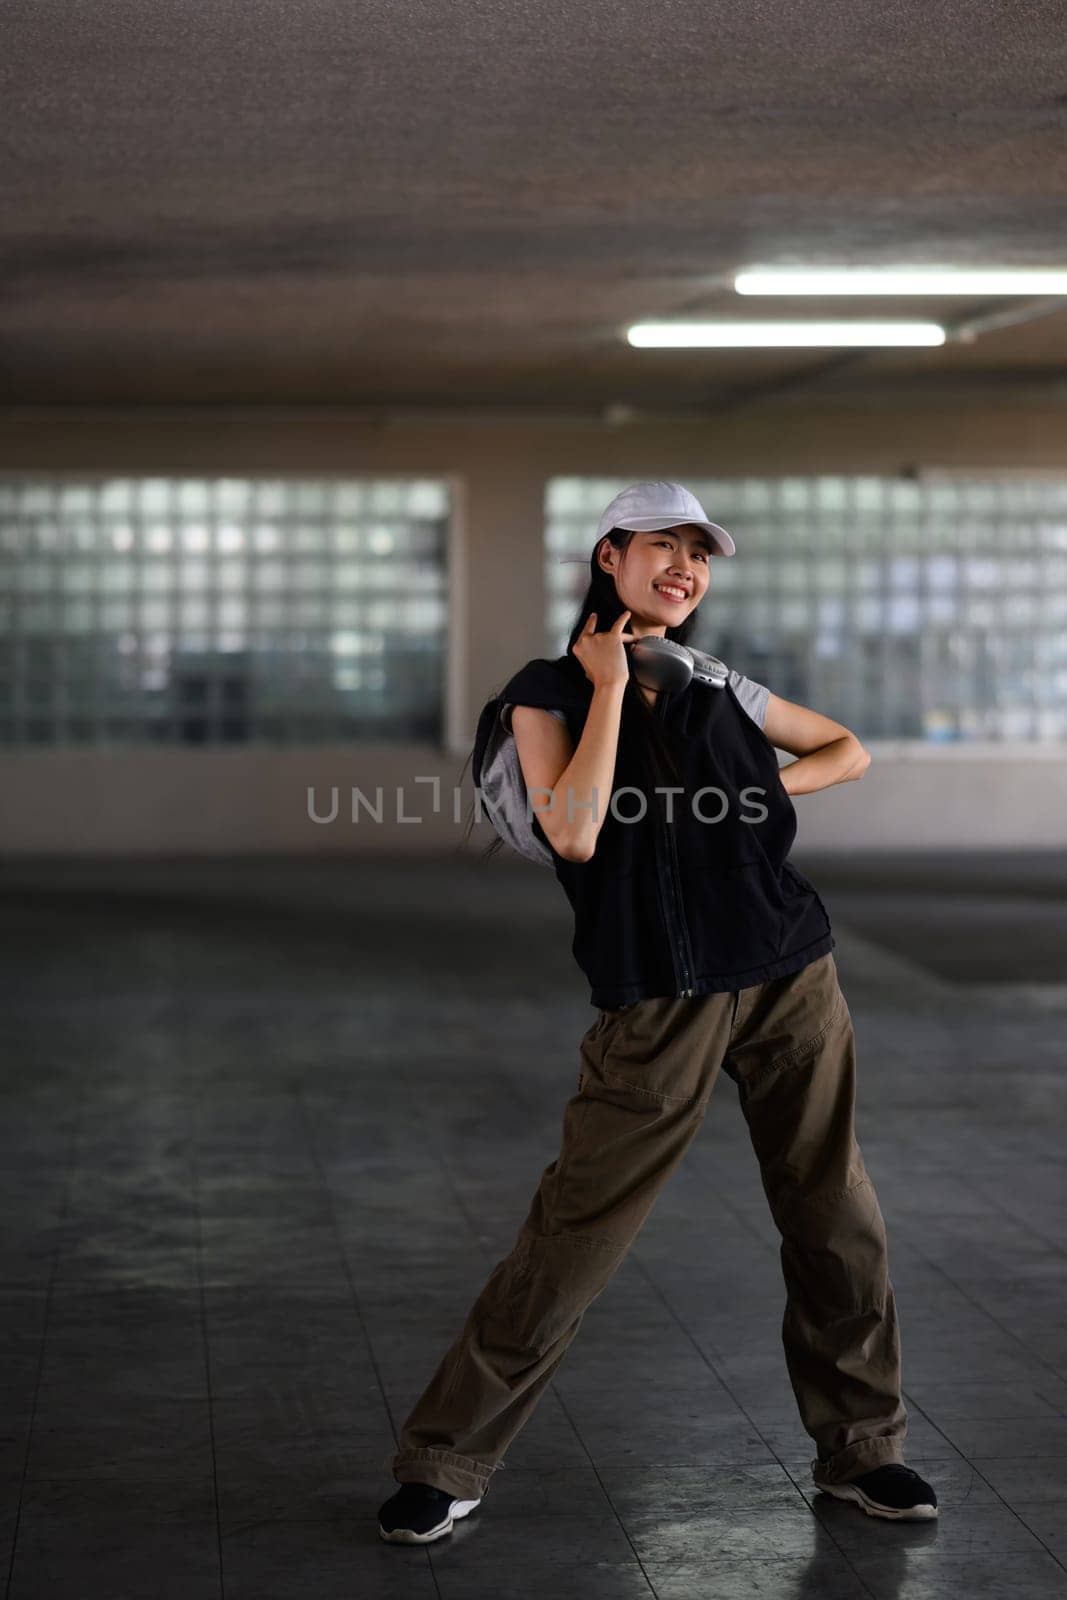 Full length of smiling young woman wearing visor cap dancing in underground car parking.